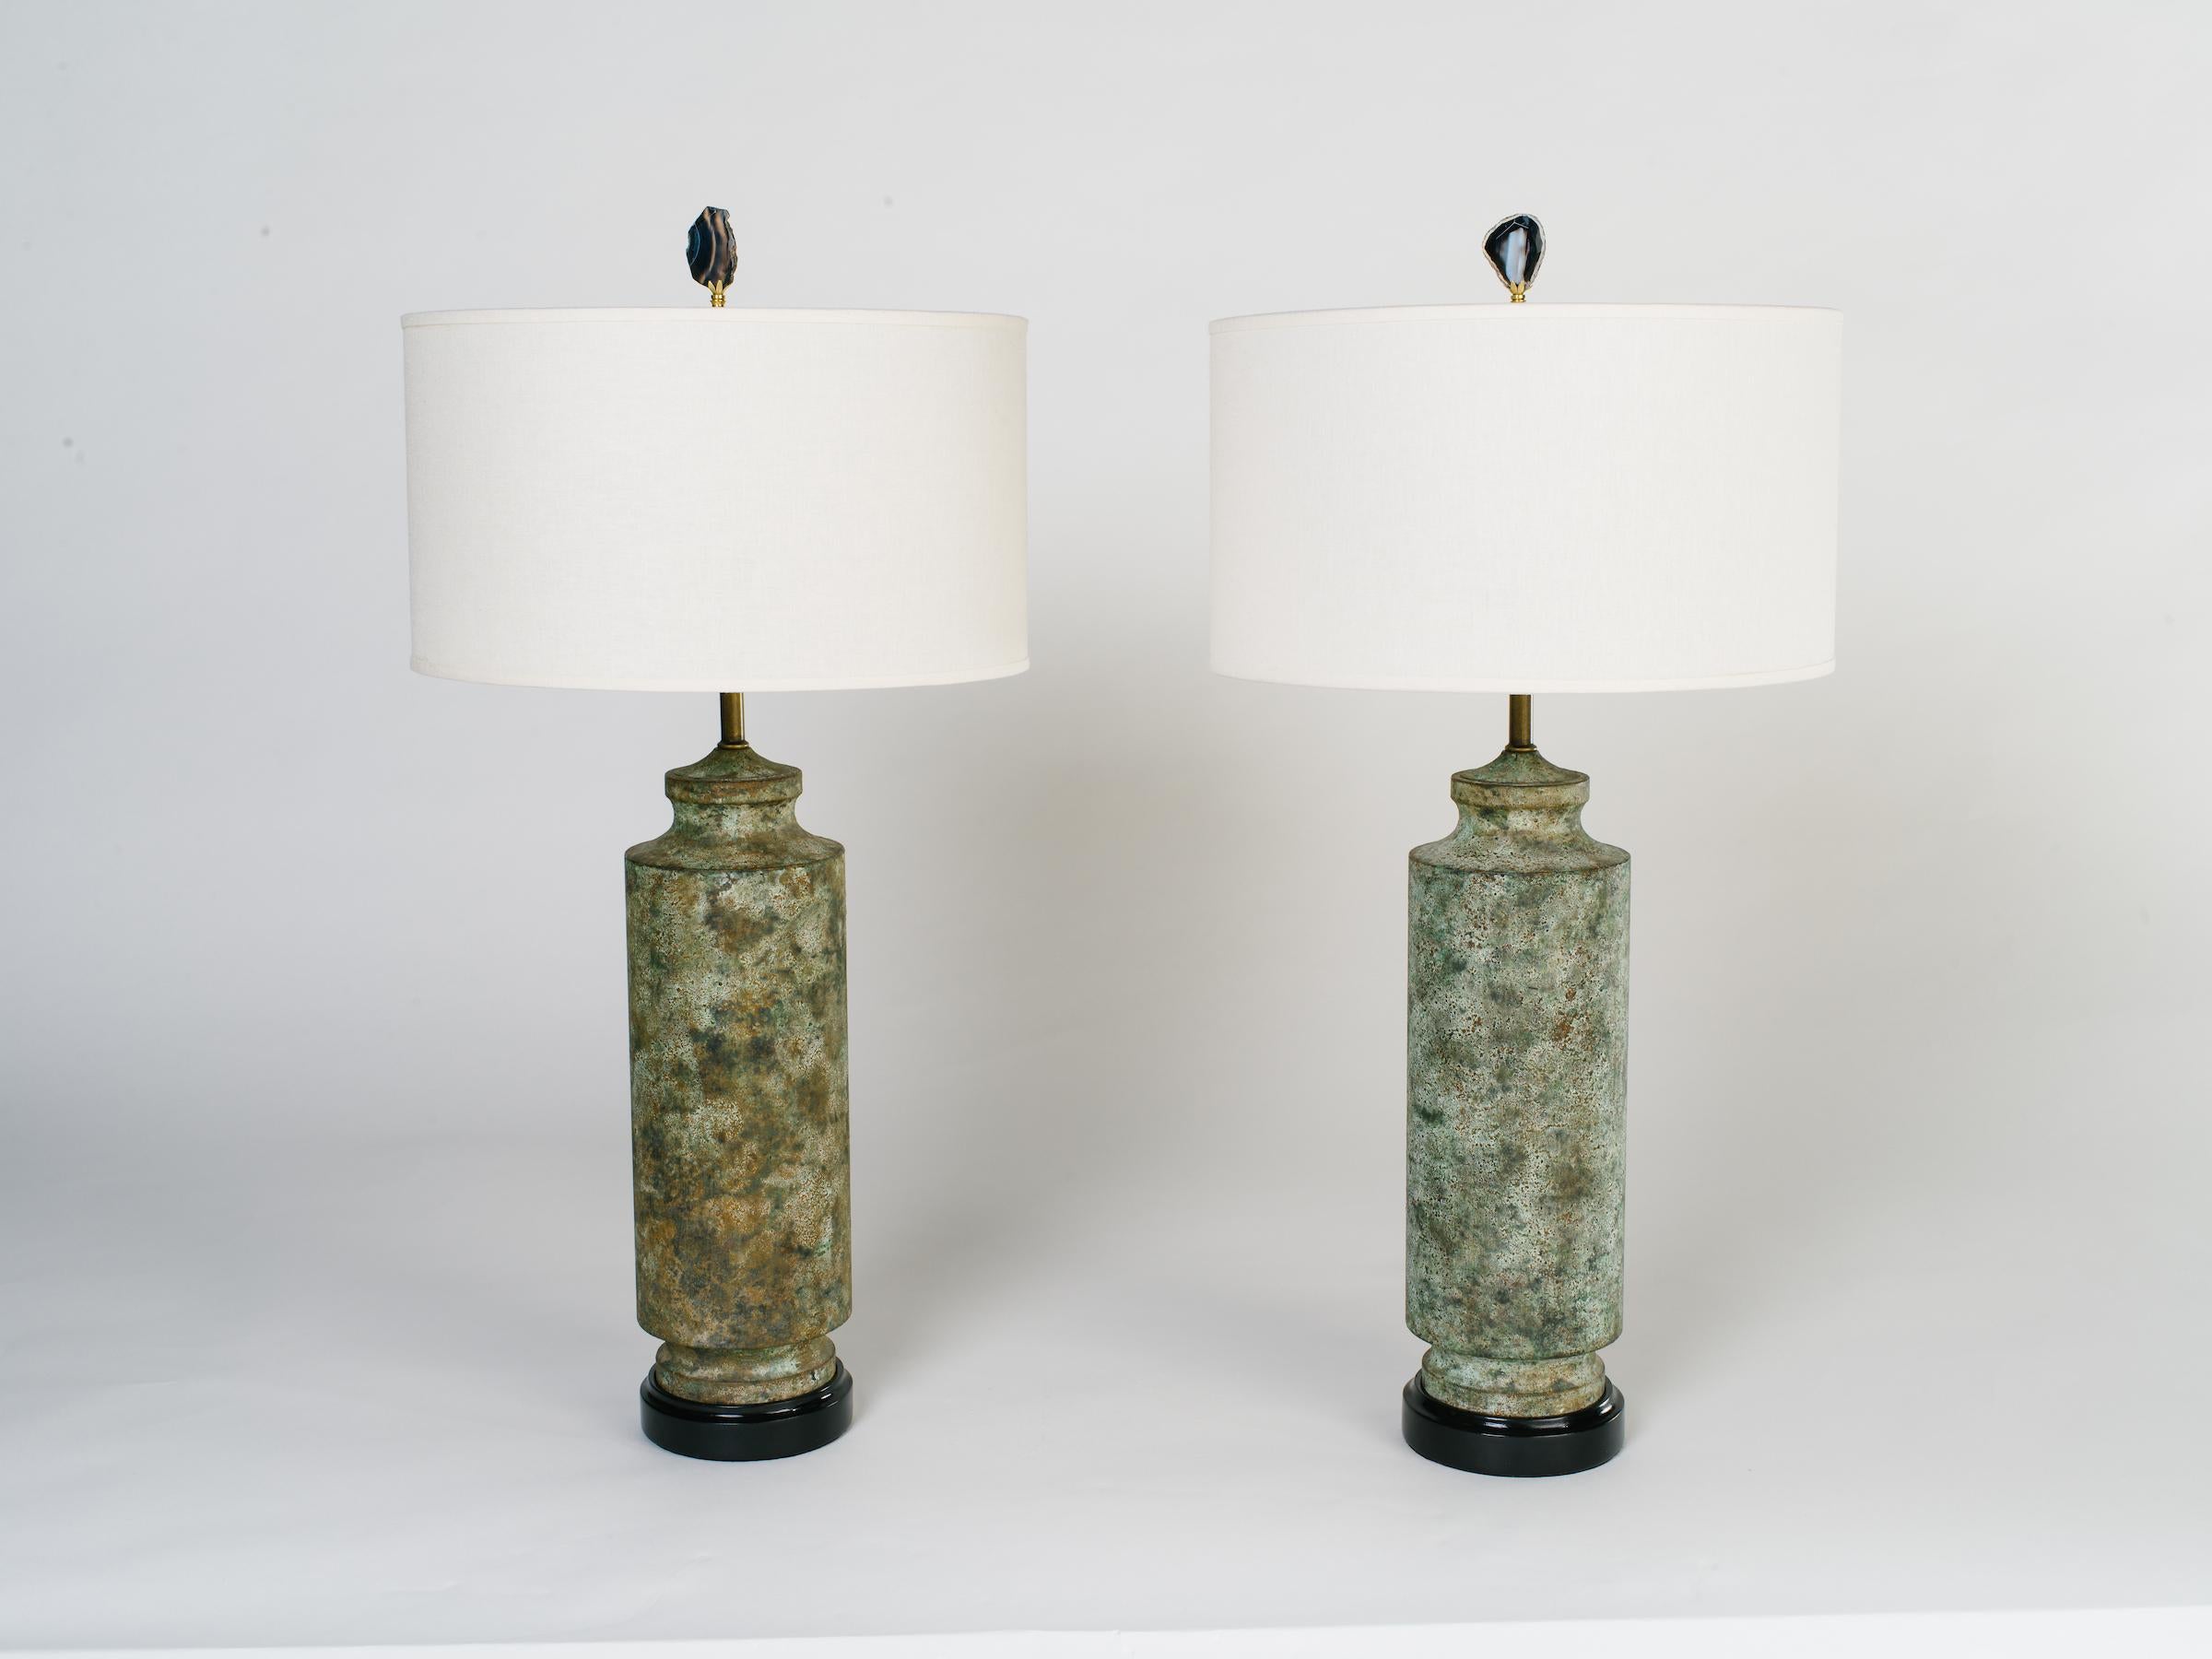 American Pair of Mid-Century Modern Brutalist Lamps in Distressed Oxidized Metal